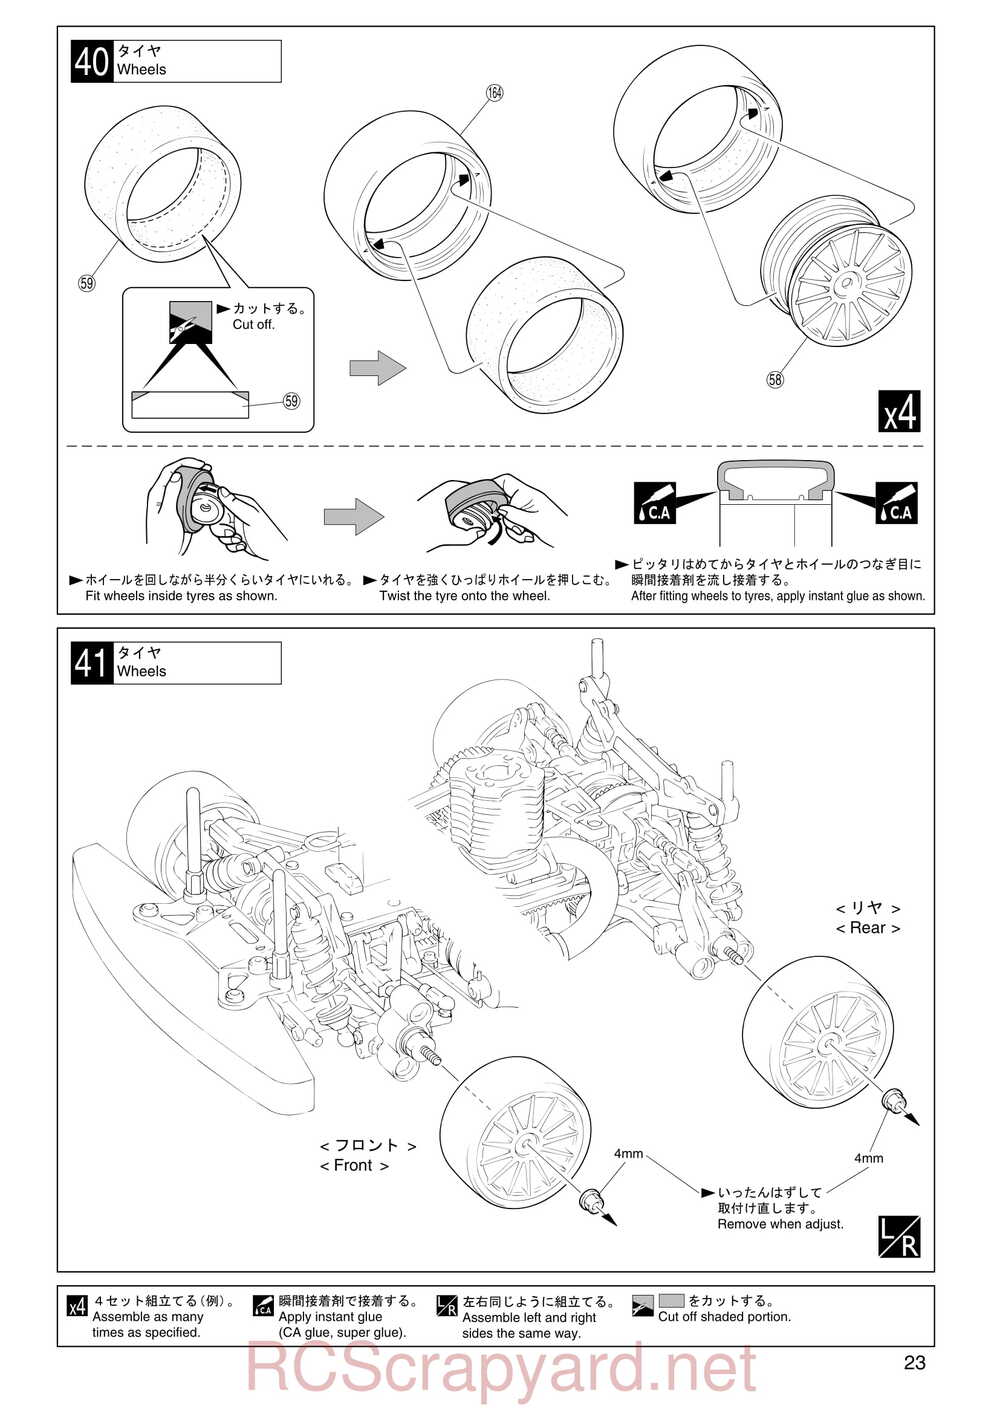 Kyosho - 31011 - V-One R - Manual - Page 23